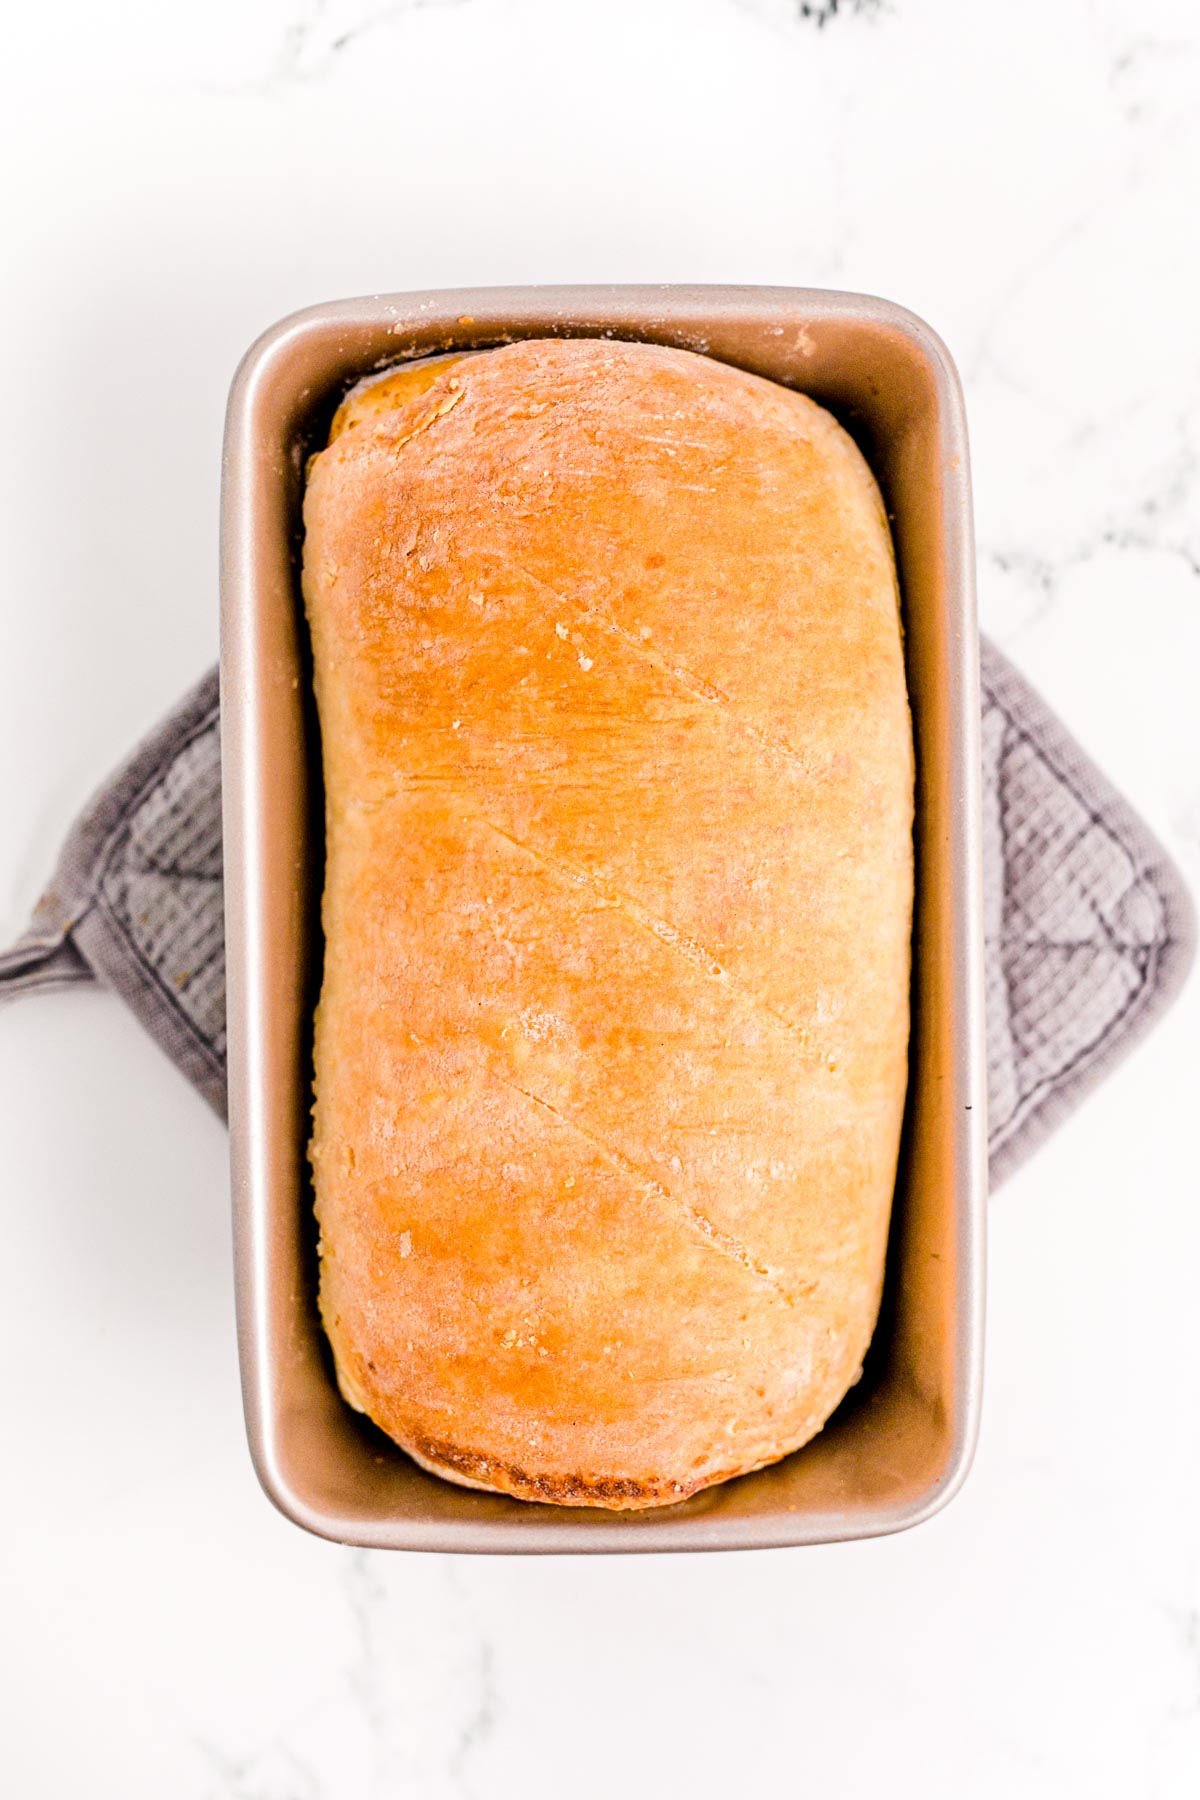 A loaf of baked cinnamon bread cooling in a load pan on an oven mitt.